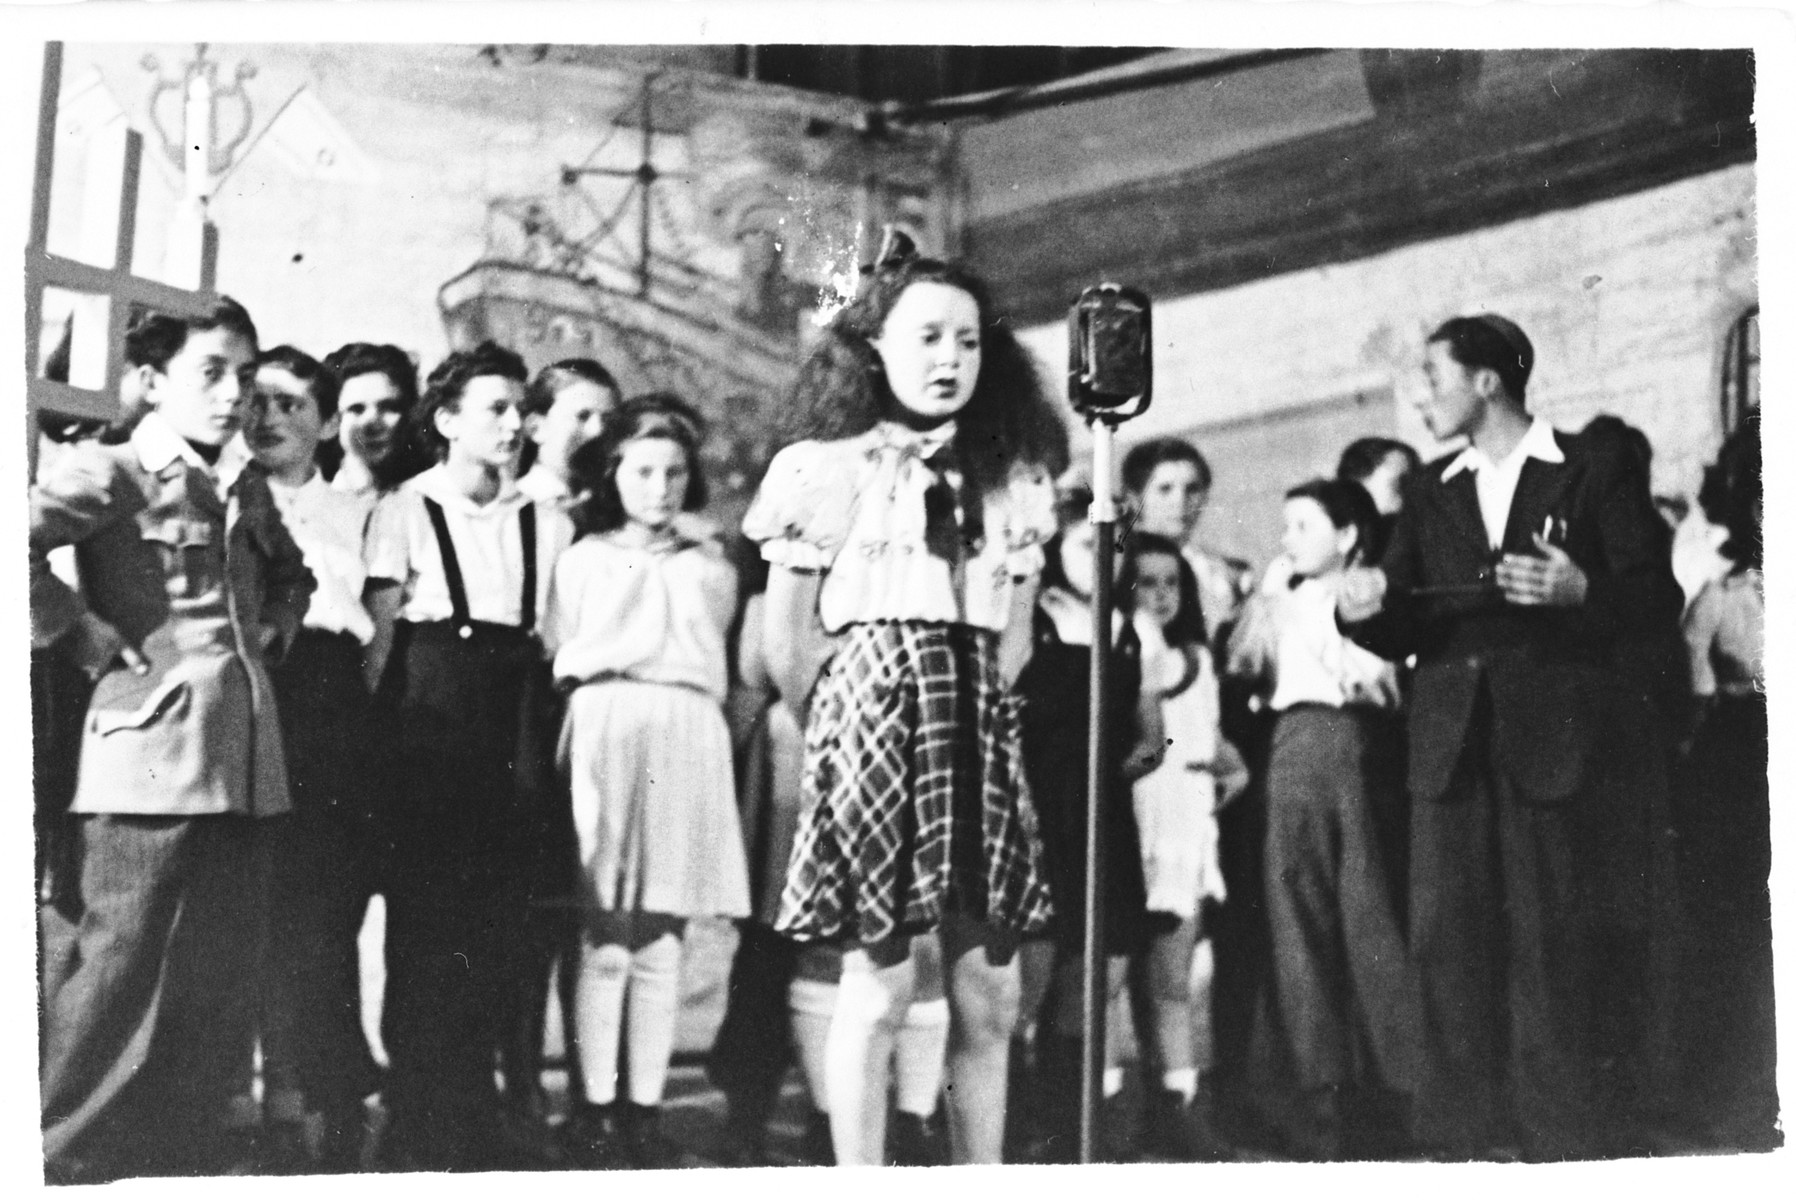 Performance by the children's choir of the Hebrew Tarbut school in the Foehrenwald displaced persons camp.

Among those pictured is Yasha Einstein (far left).